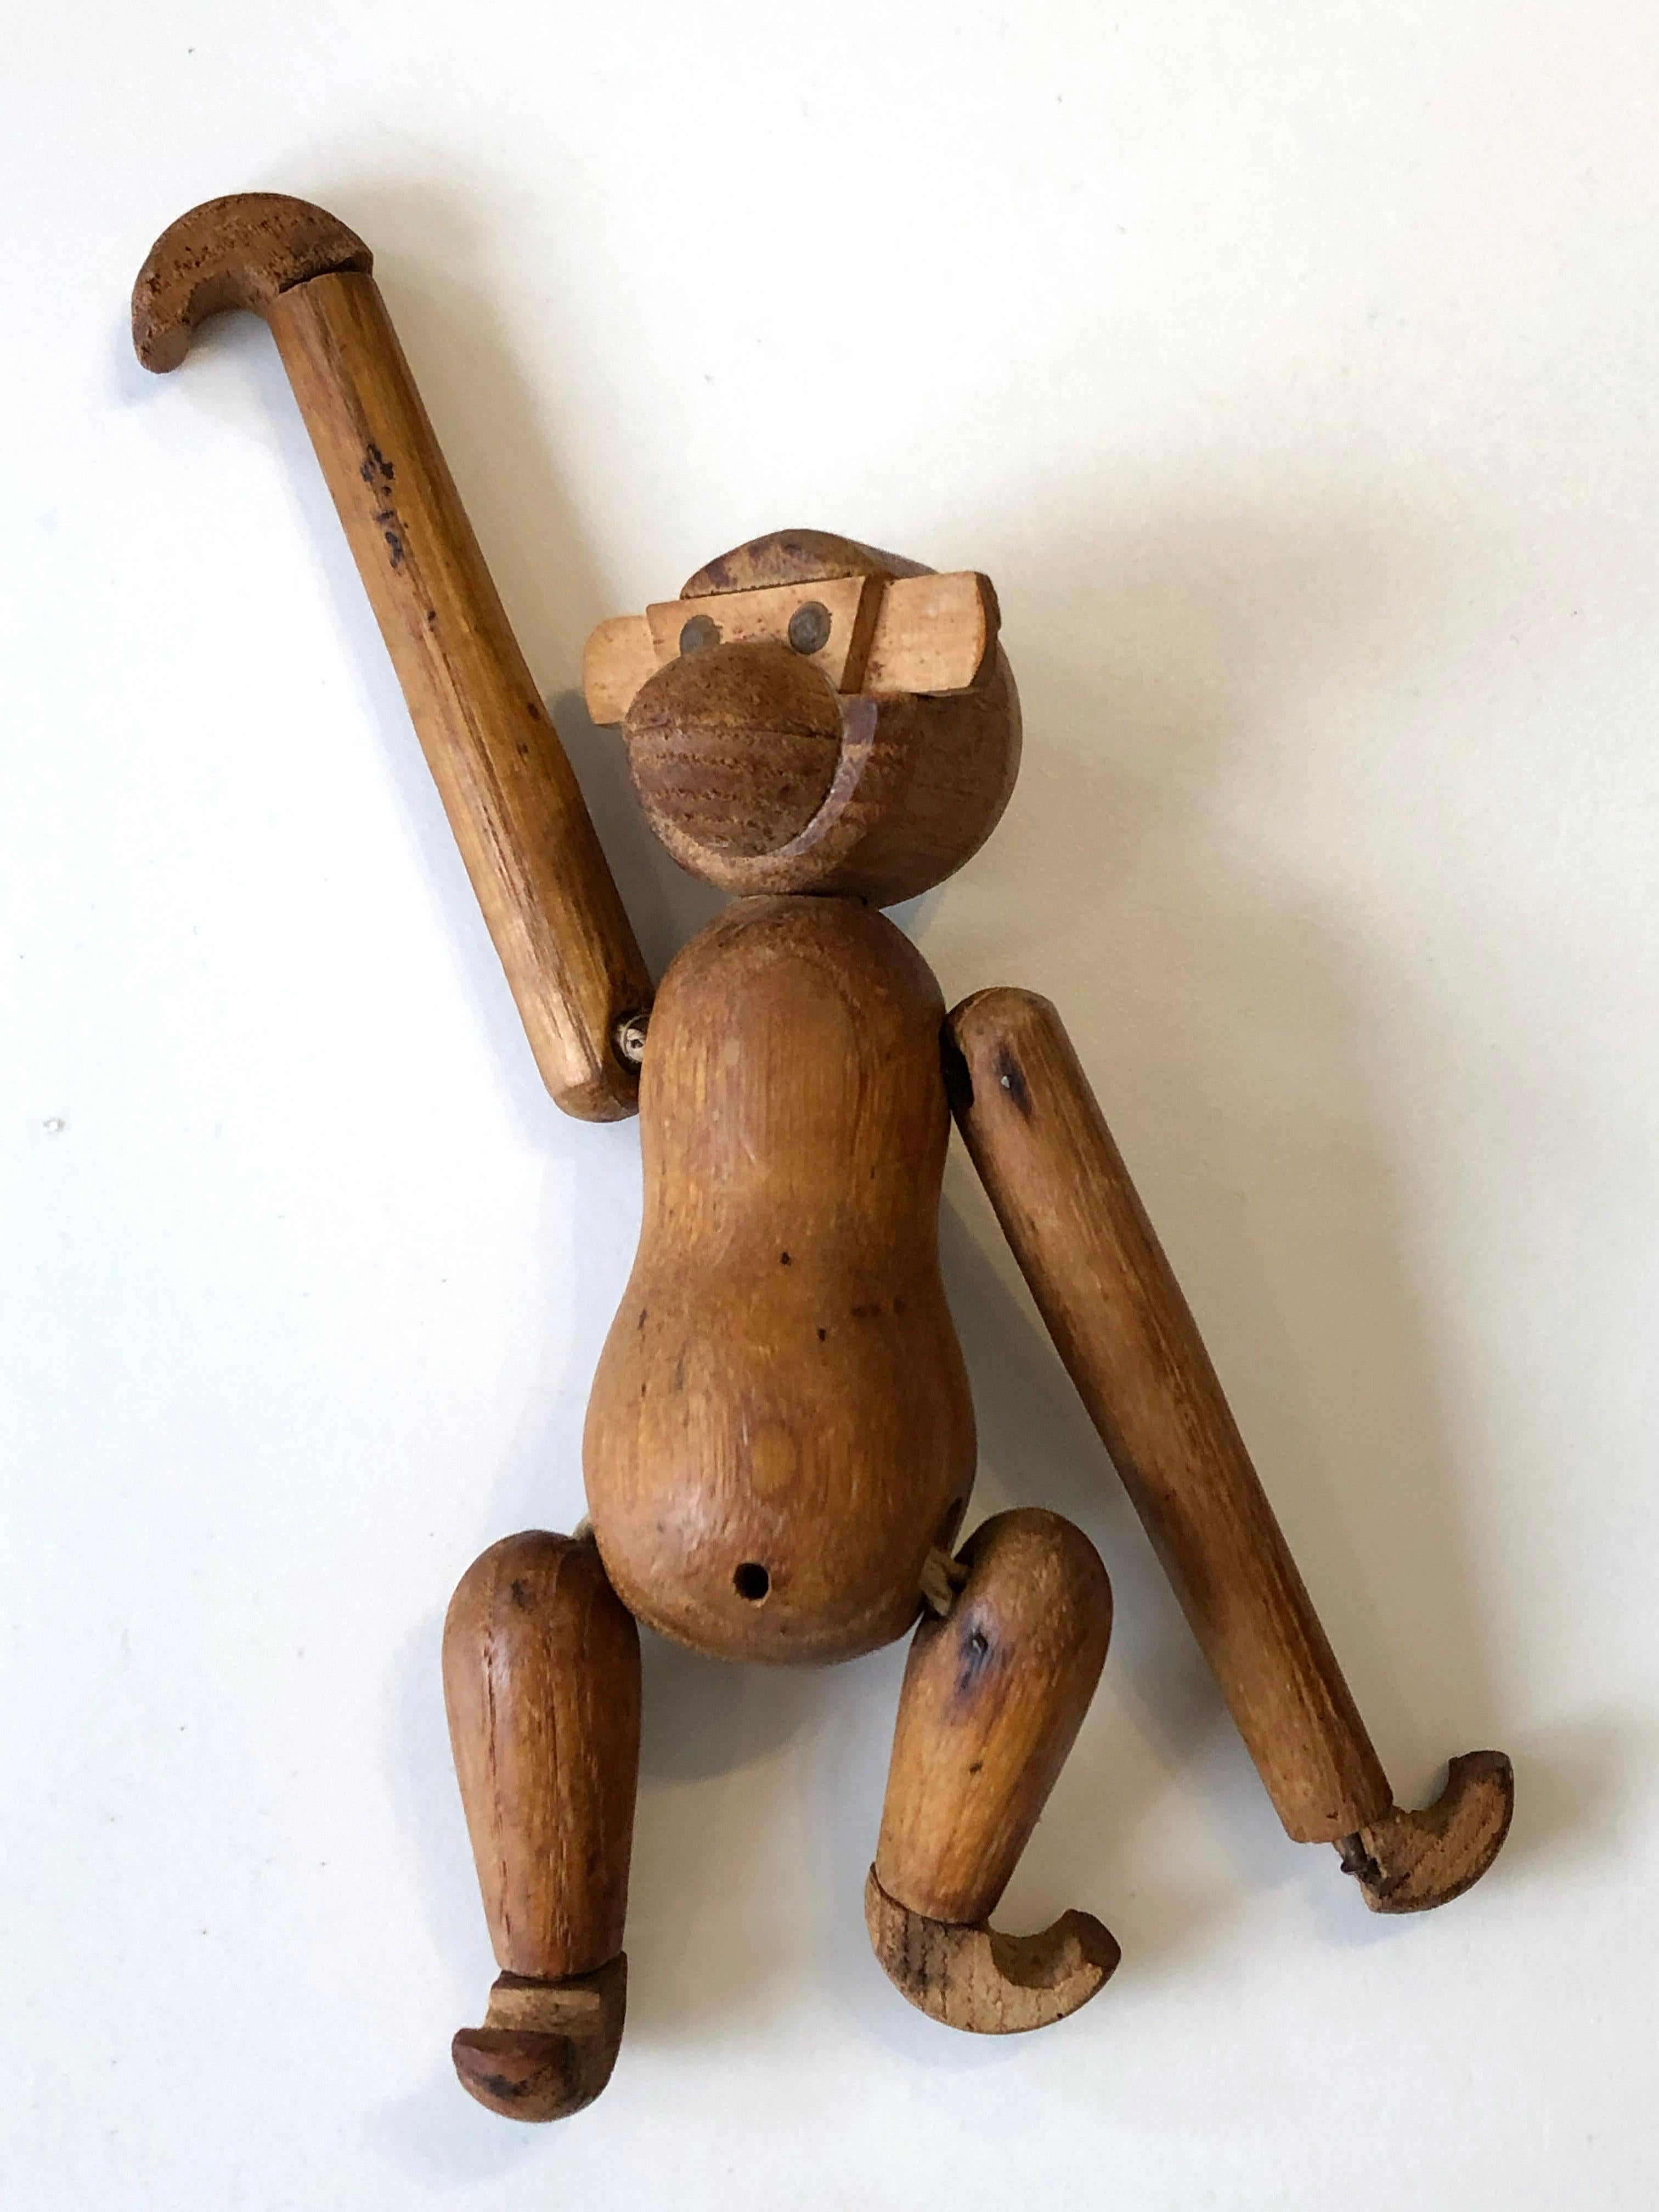 Vintage 1950's small wooden monkey - Kay Bojesen style For Sale 3